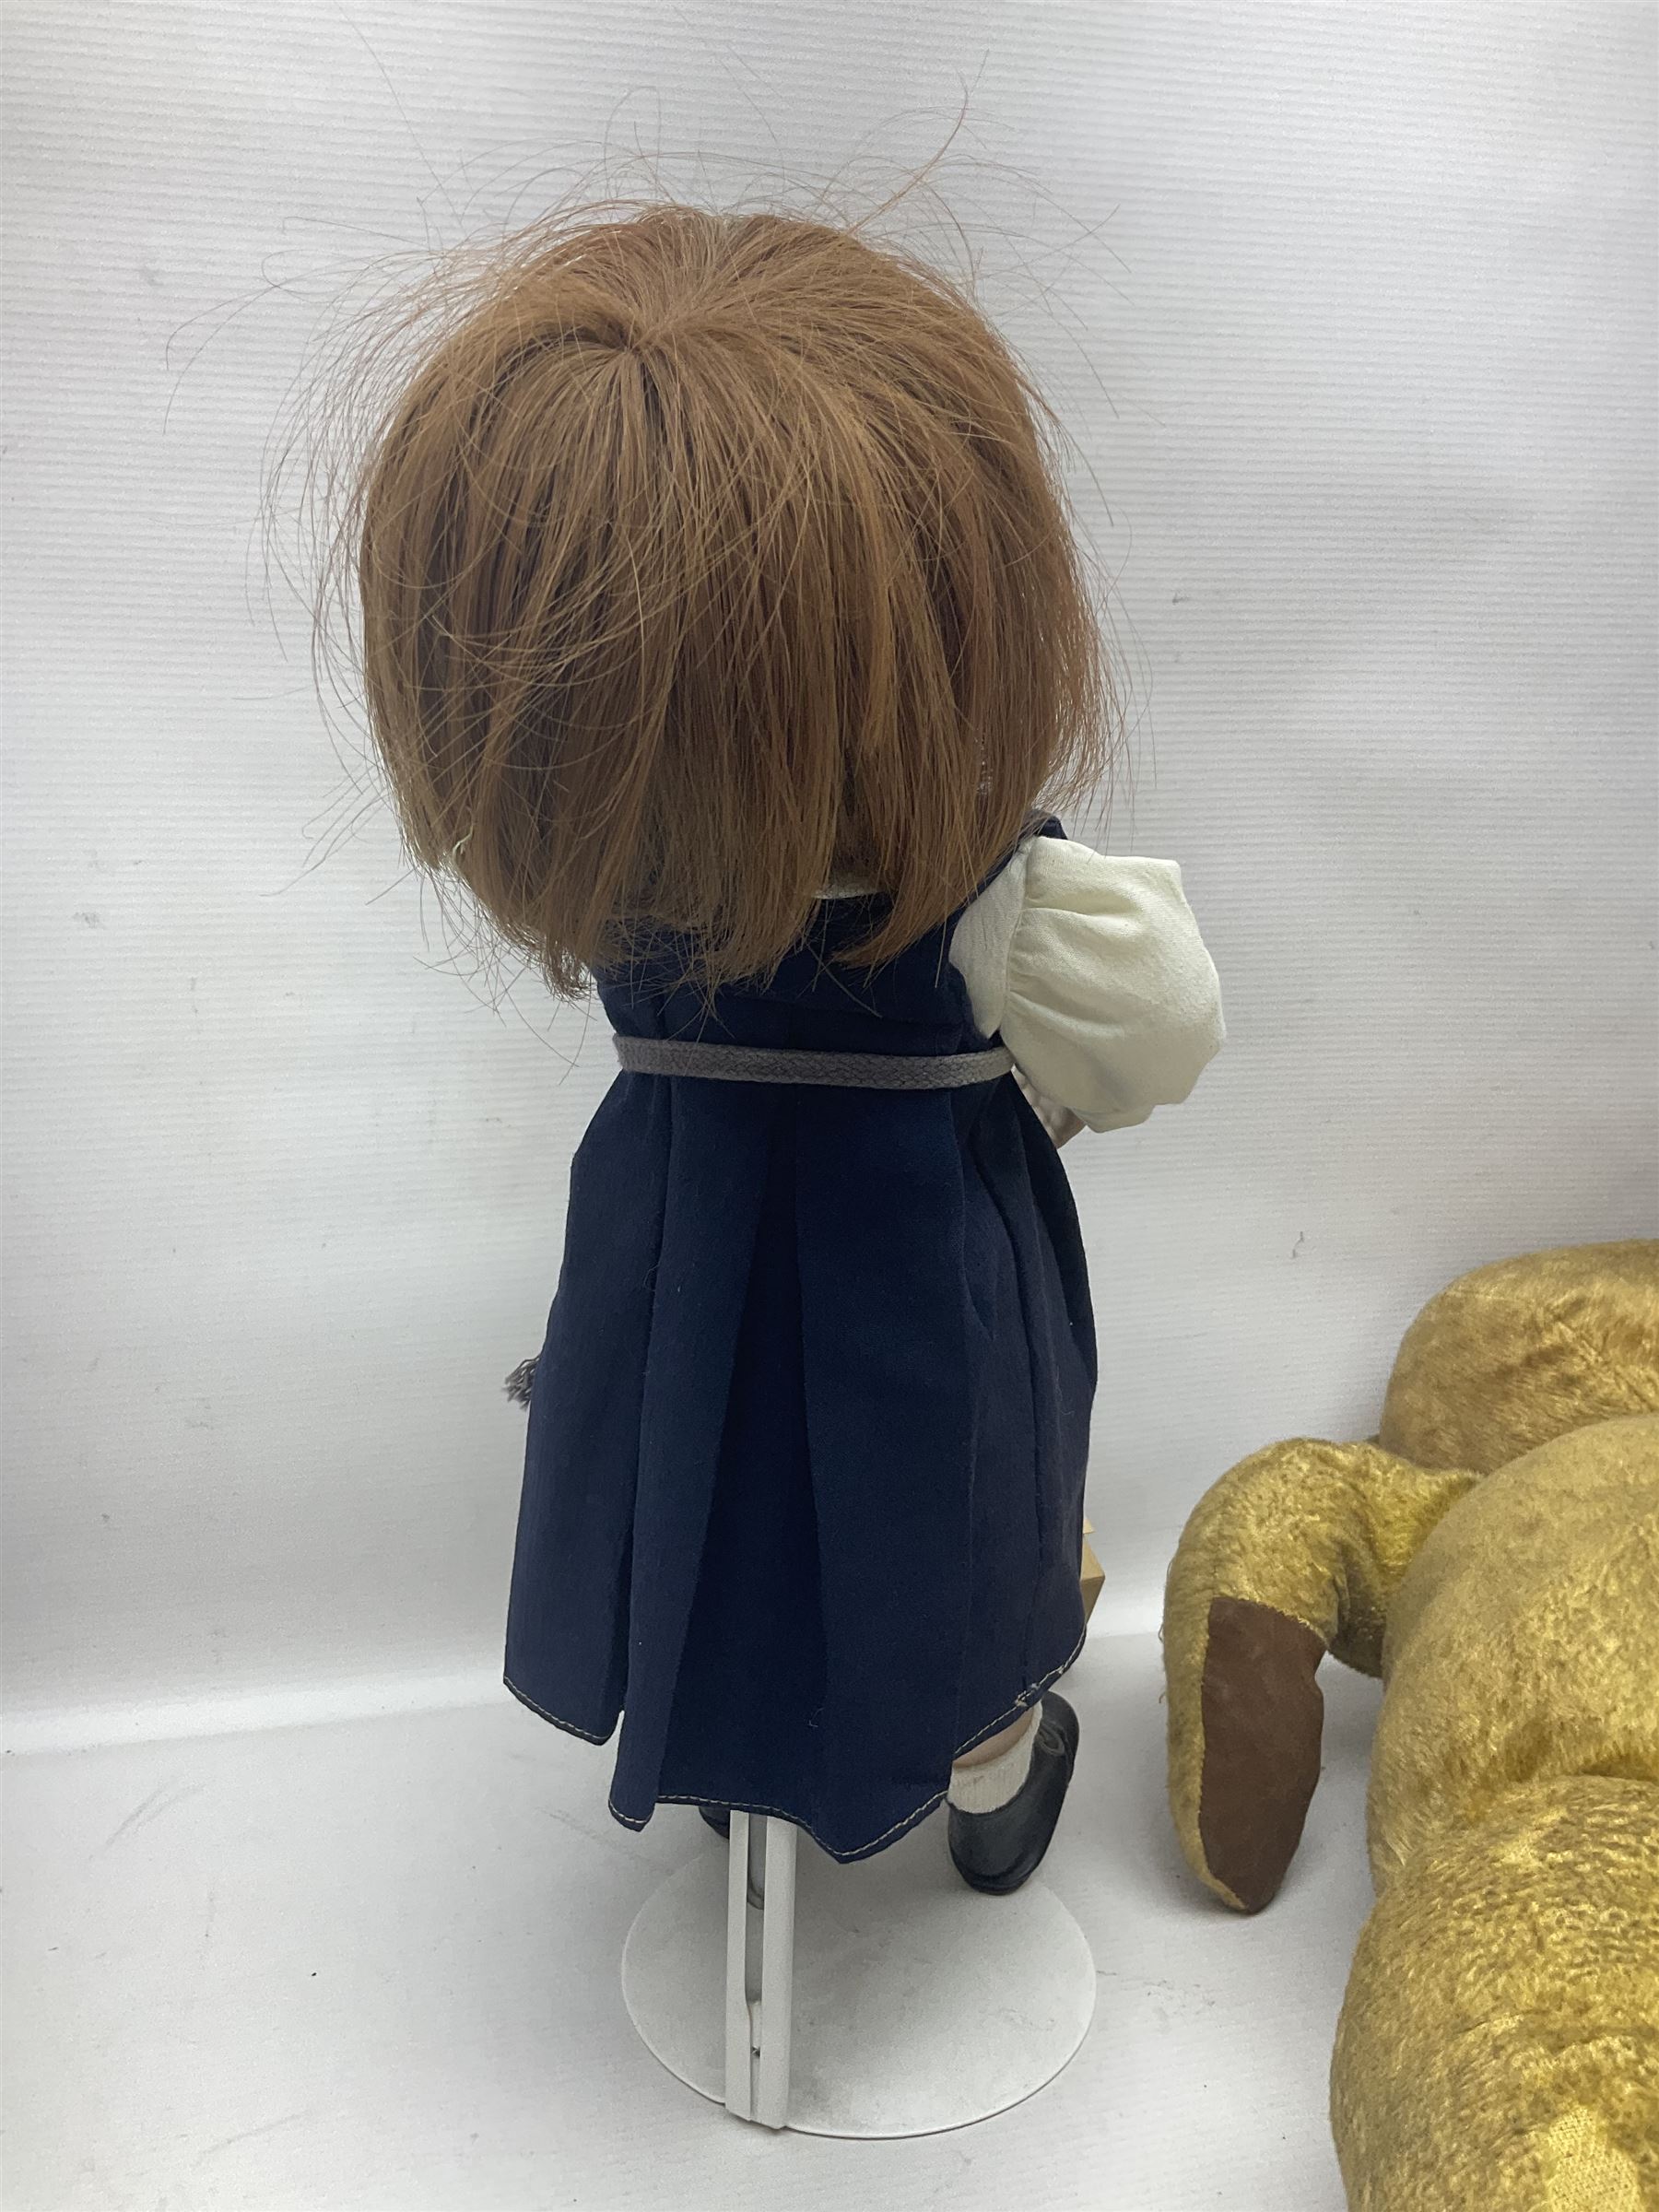 Mid-20th century woodwool filled teddy bear; and porcelain doll dressed as a WW2 evacuee - Image 7 of 9